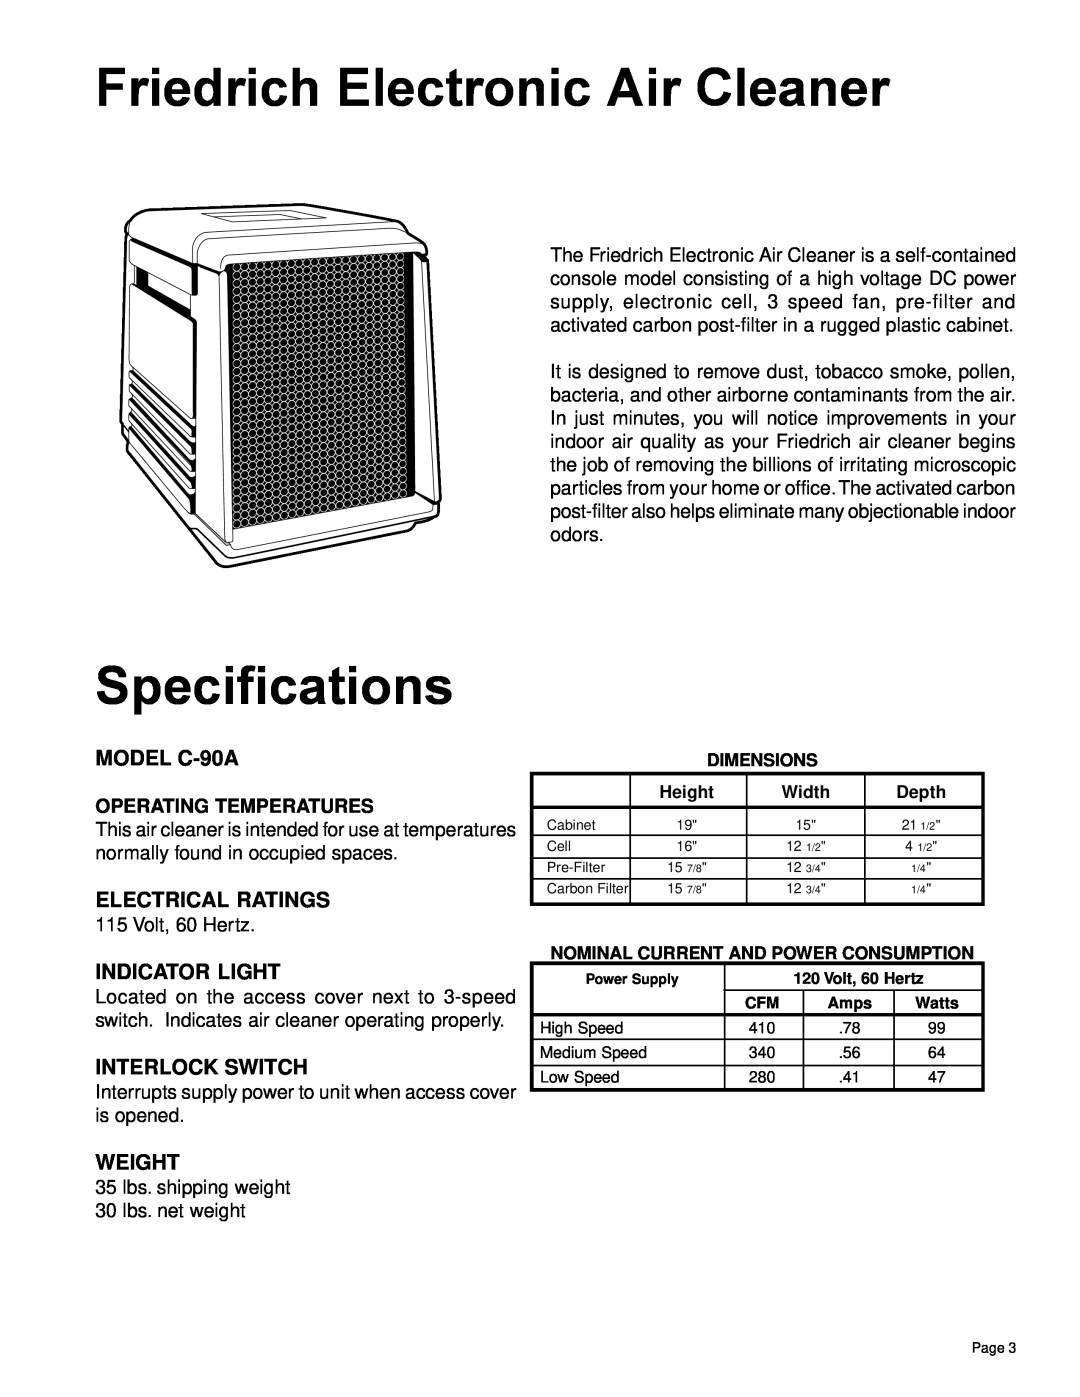 Friedrich Friedrich Electronic Air Cleaner, Specifications, MODEL C-90A, Electrical Ratings, Indicator Light, Weight 